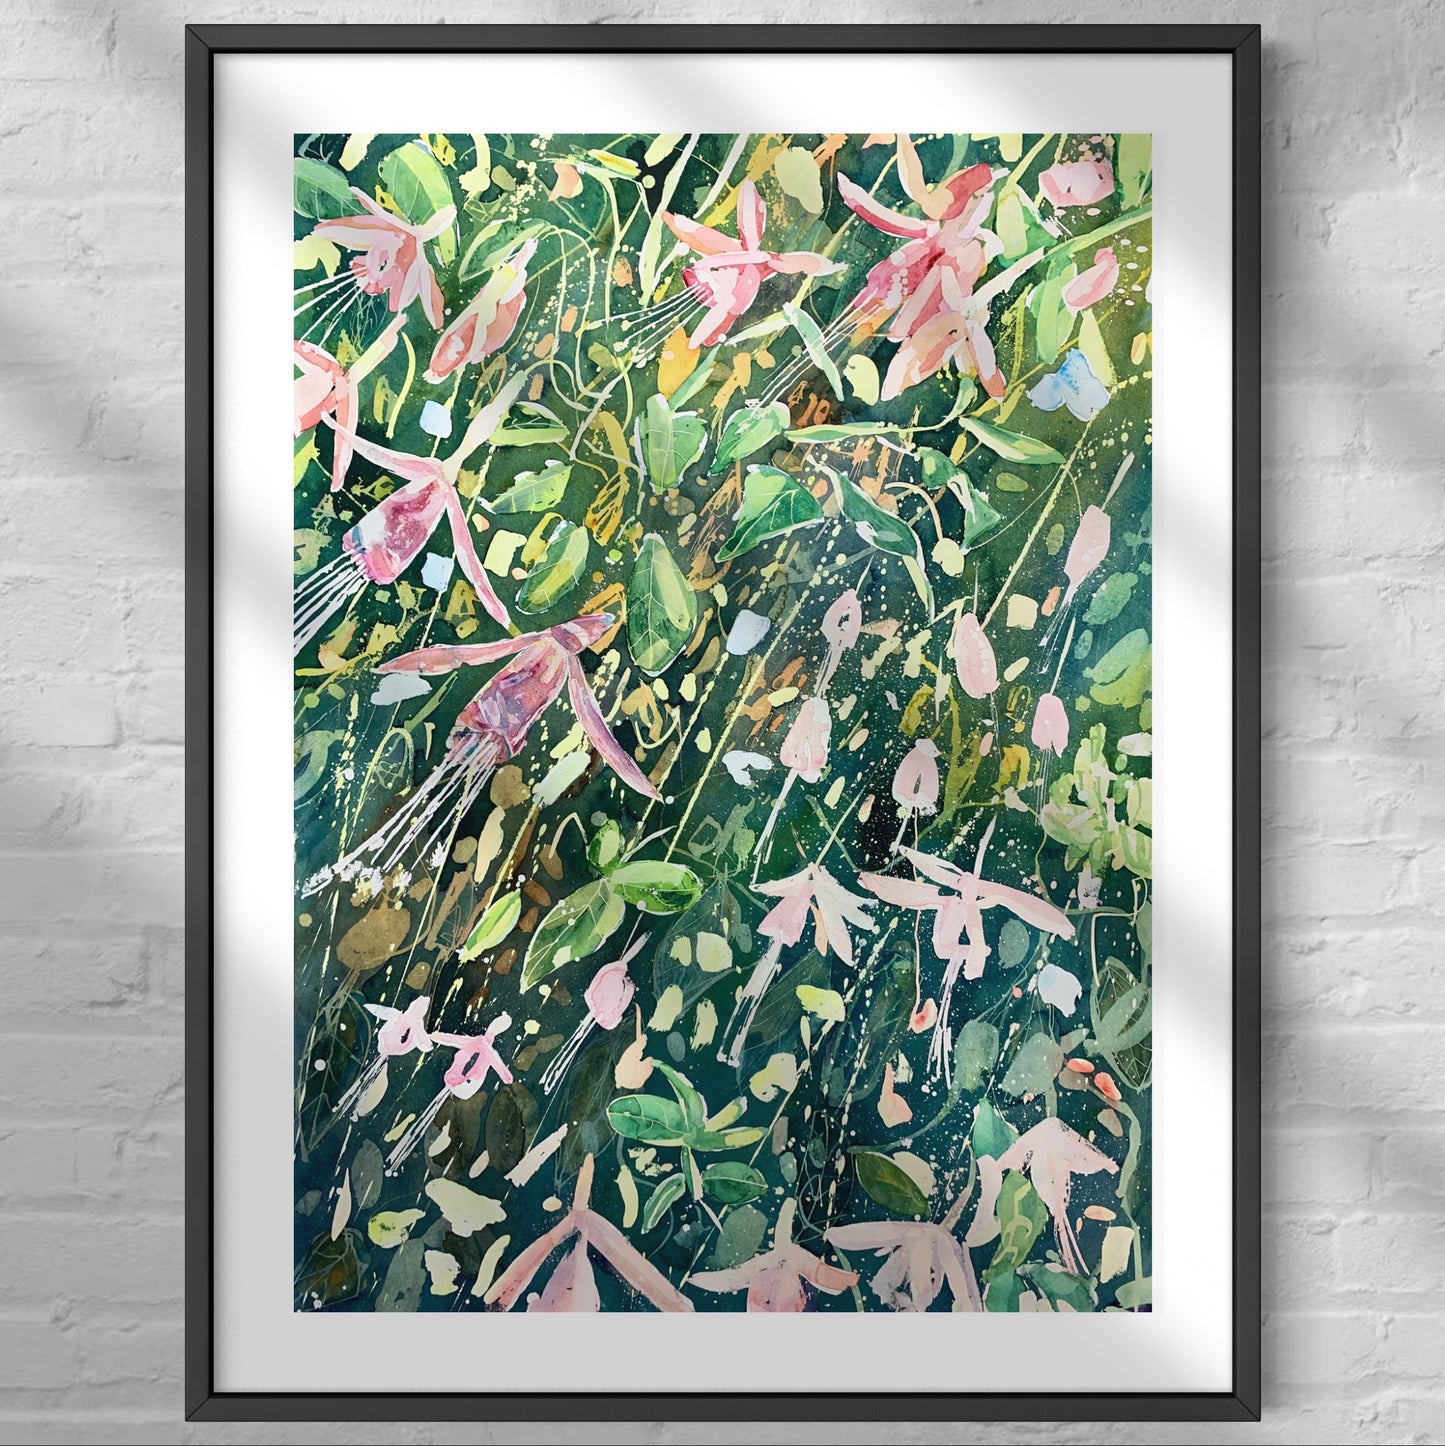 Moment of Flowers (Original, Signed and Framed)